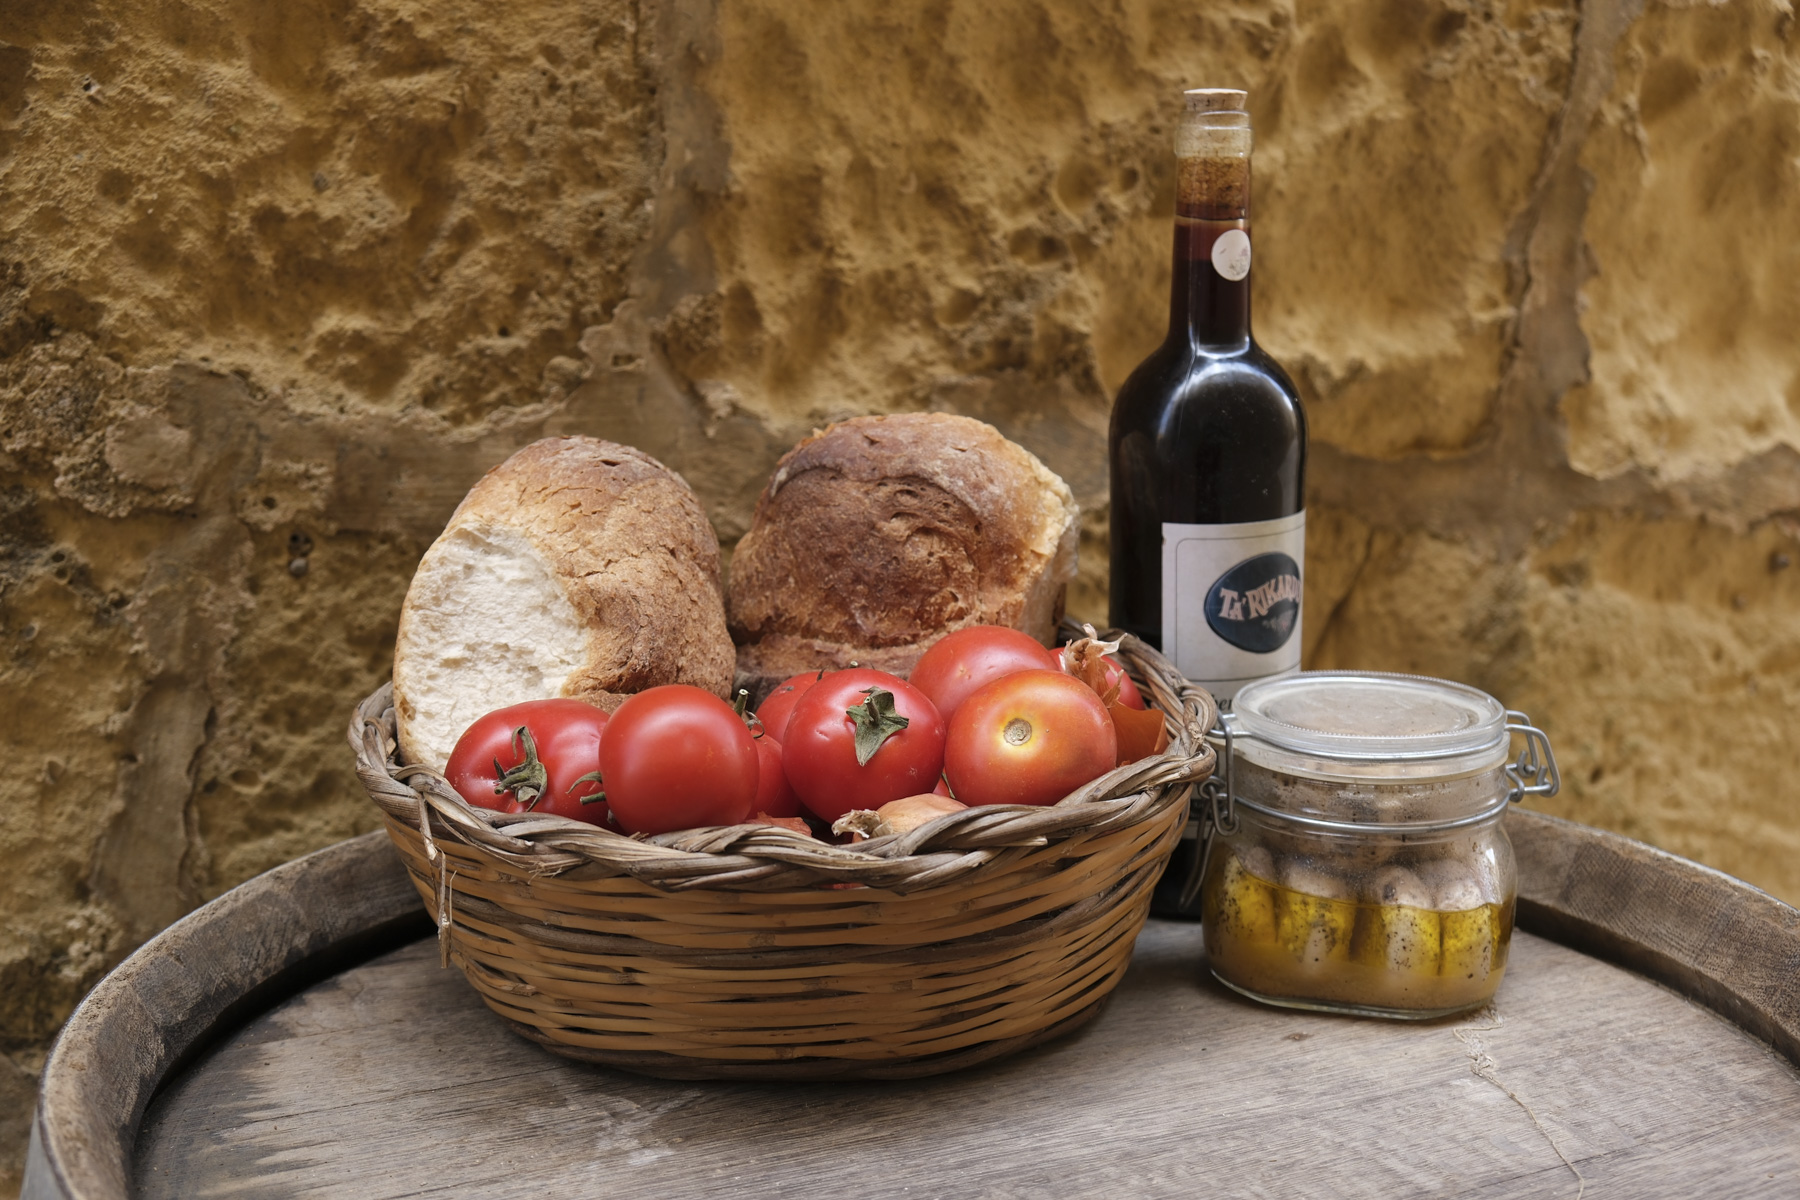 Closeup of wine bottle, bread and tomatoes in basket